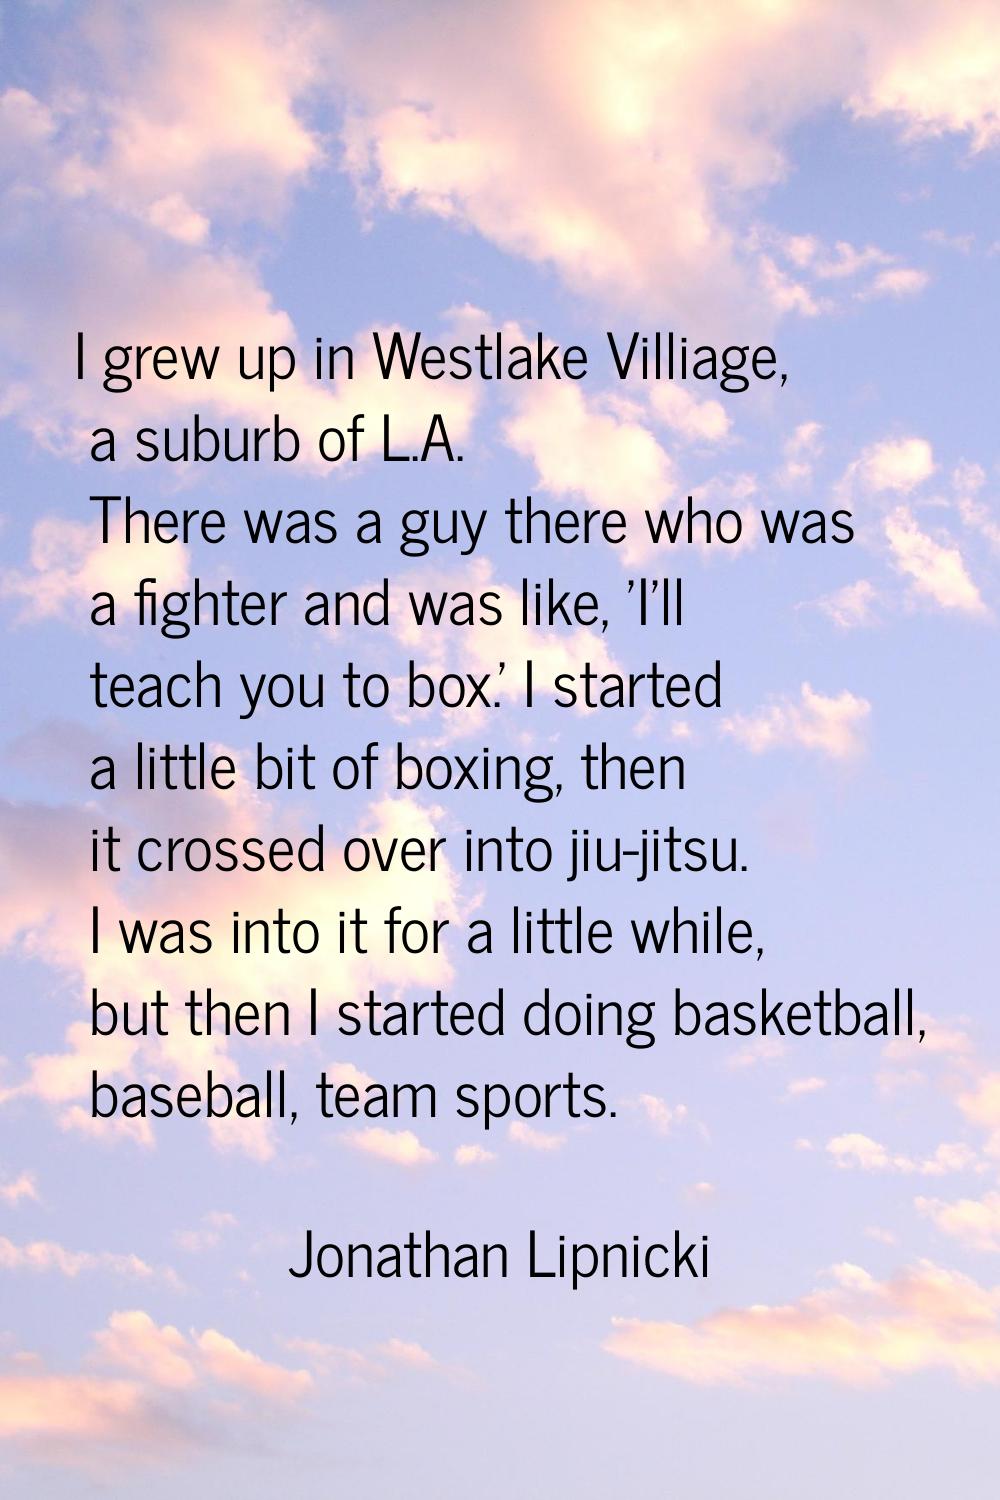 I grew up in Westlake Villiage, a suburb of L.A. There was a guy there who was a fighter and was li